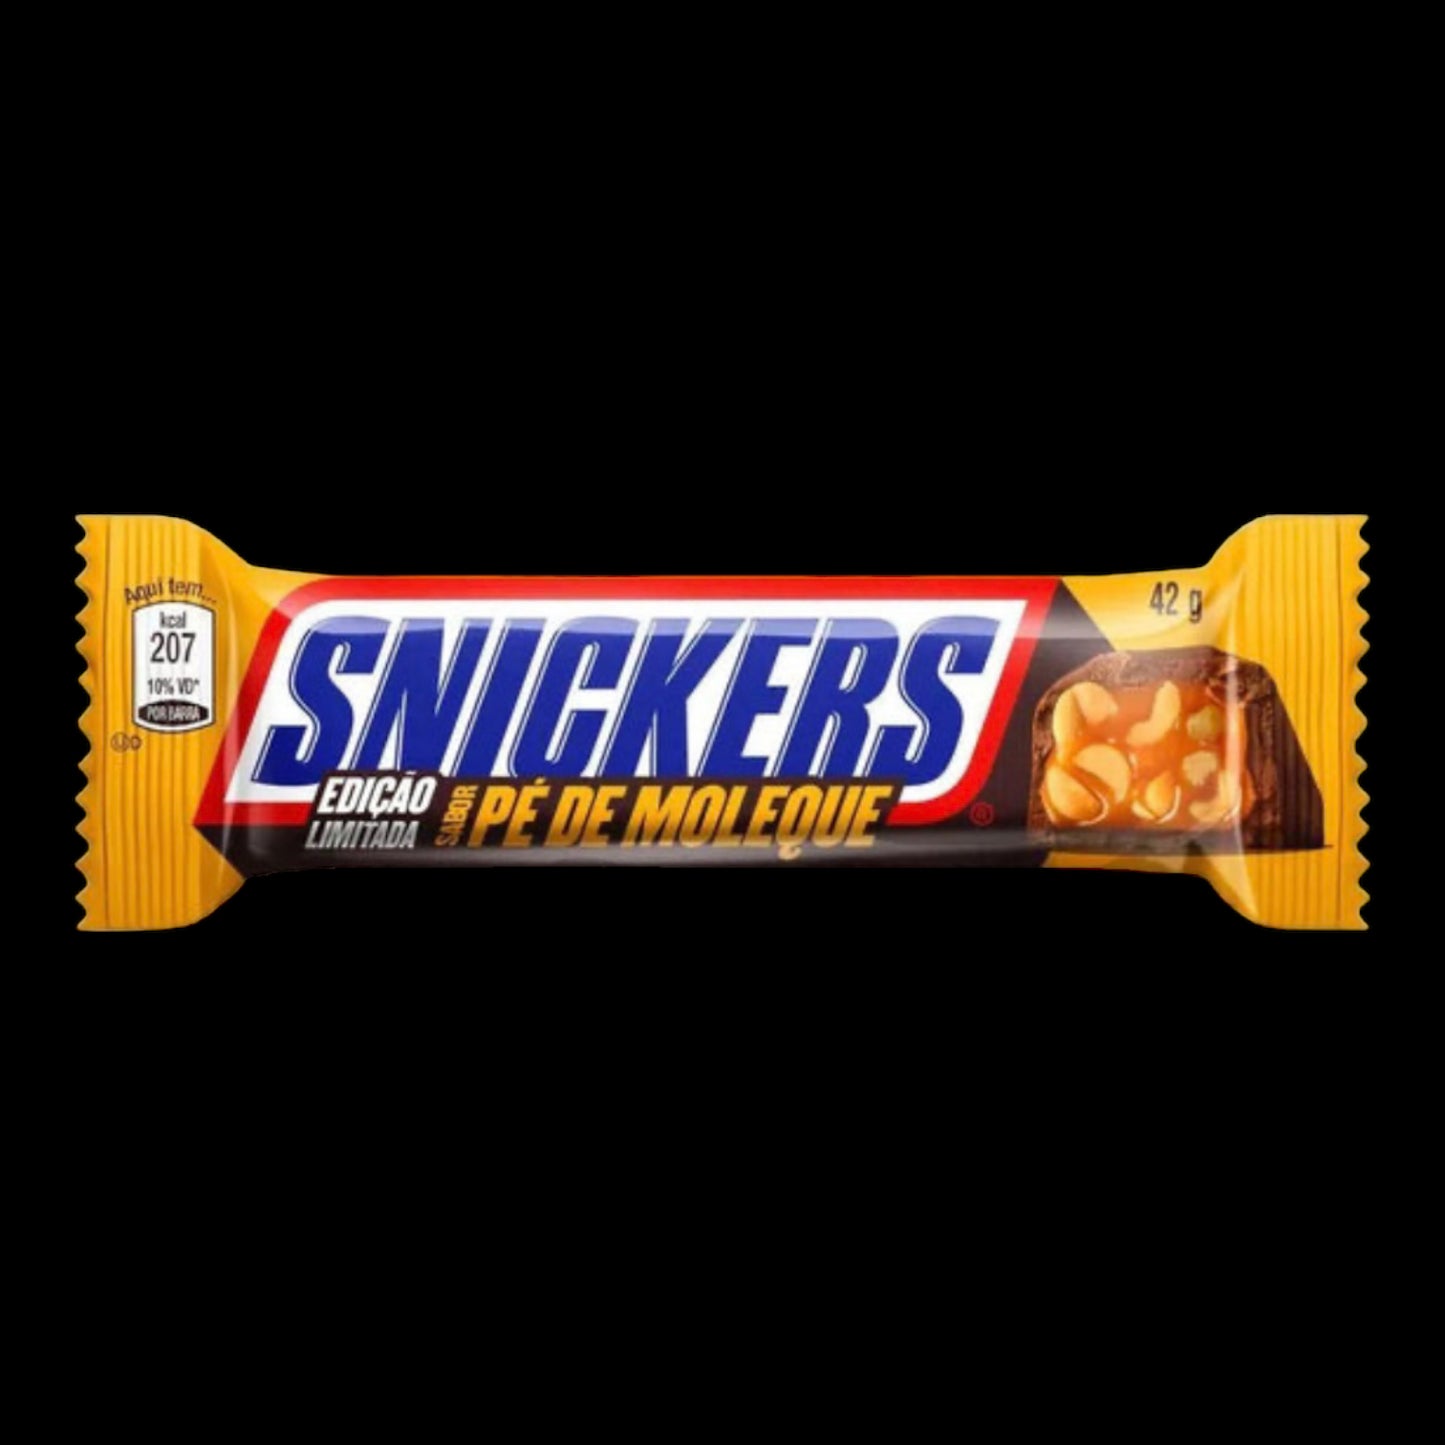 Snickers Xtreme Caramel & Nuts 42g